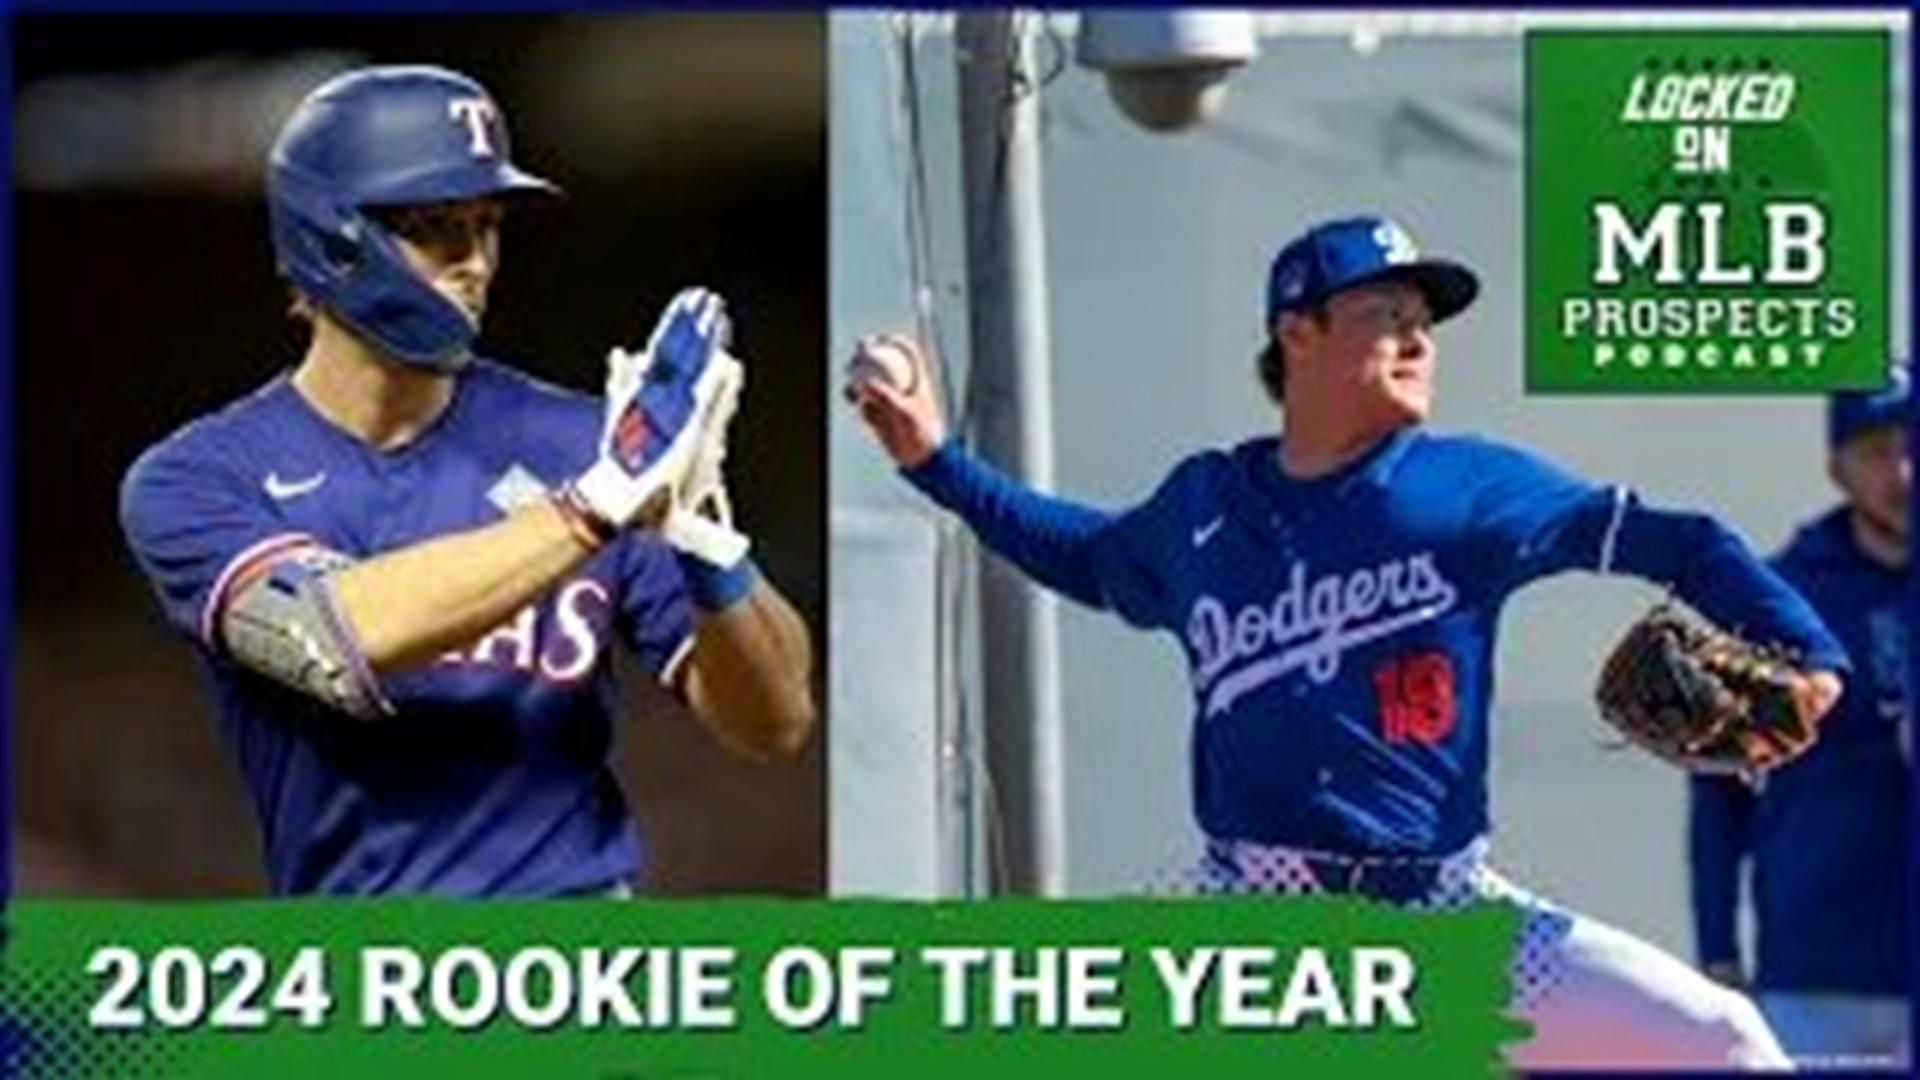 In this episode of Locked on MLB Prospects, host Lindsay Crosby discusses the upcoming baseball season, focusing on promising young players who could win ROTY.